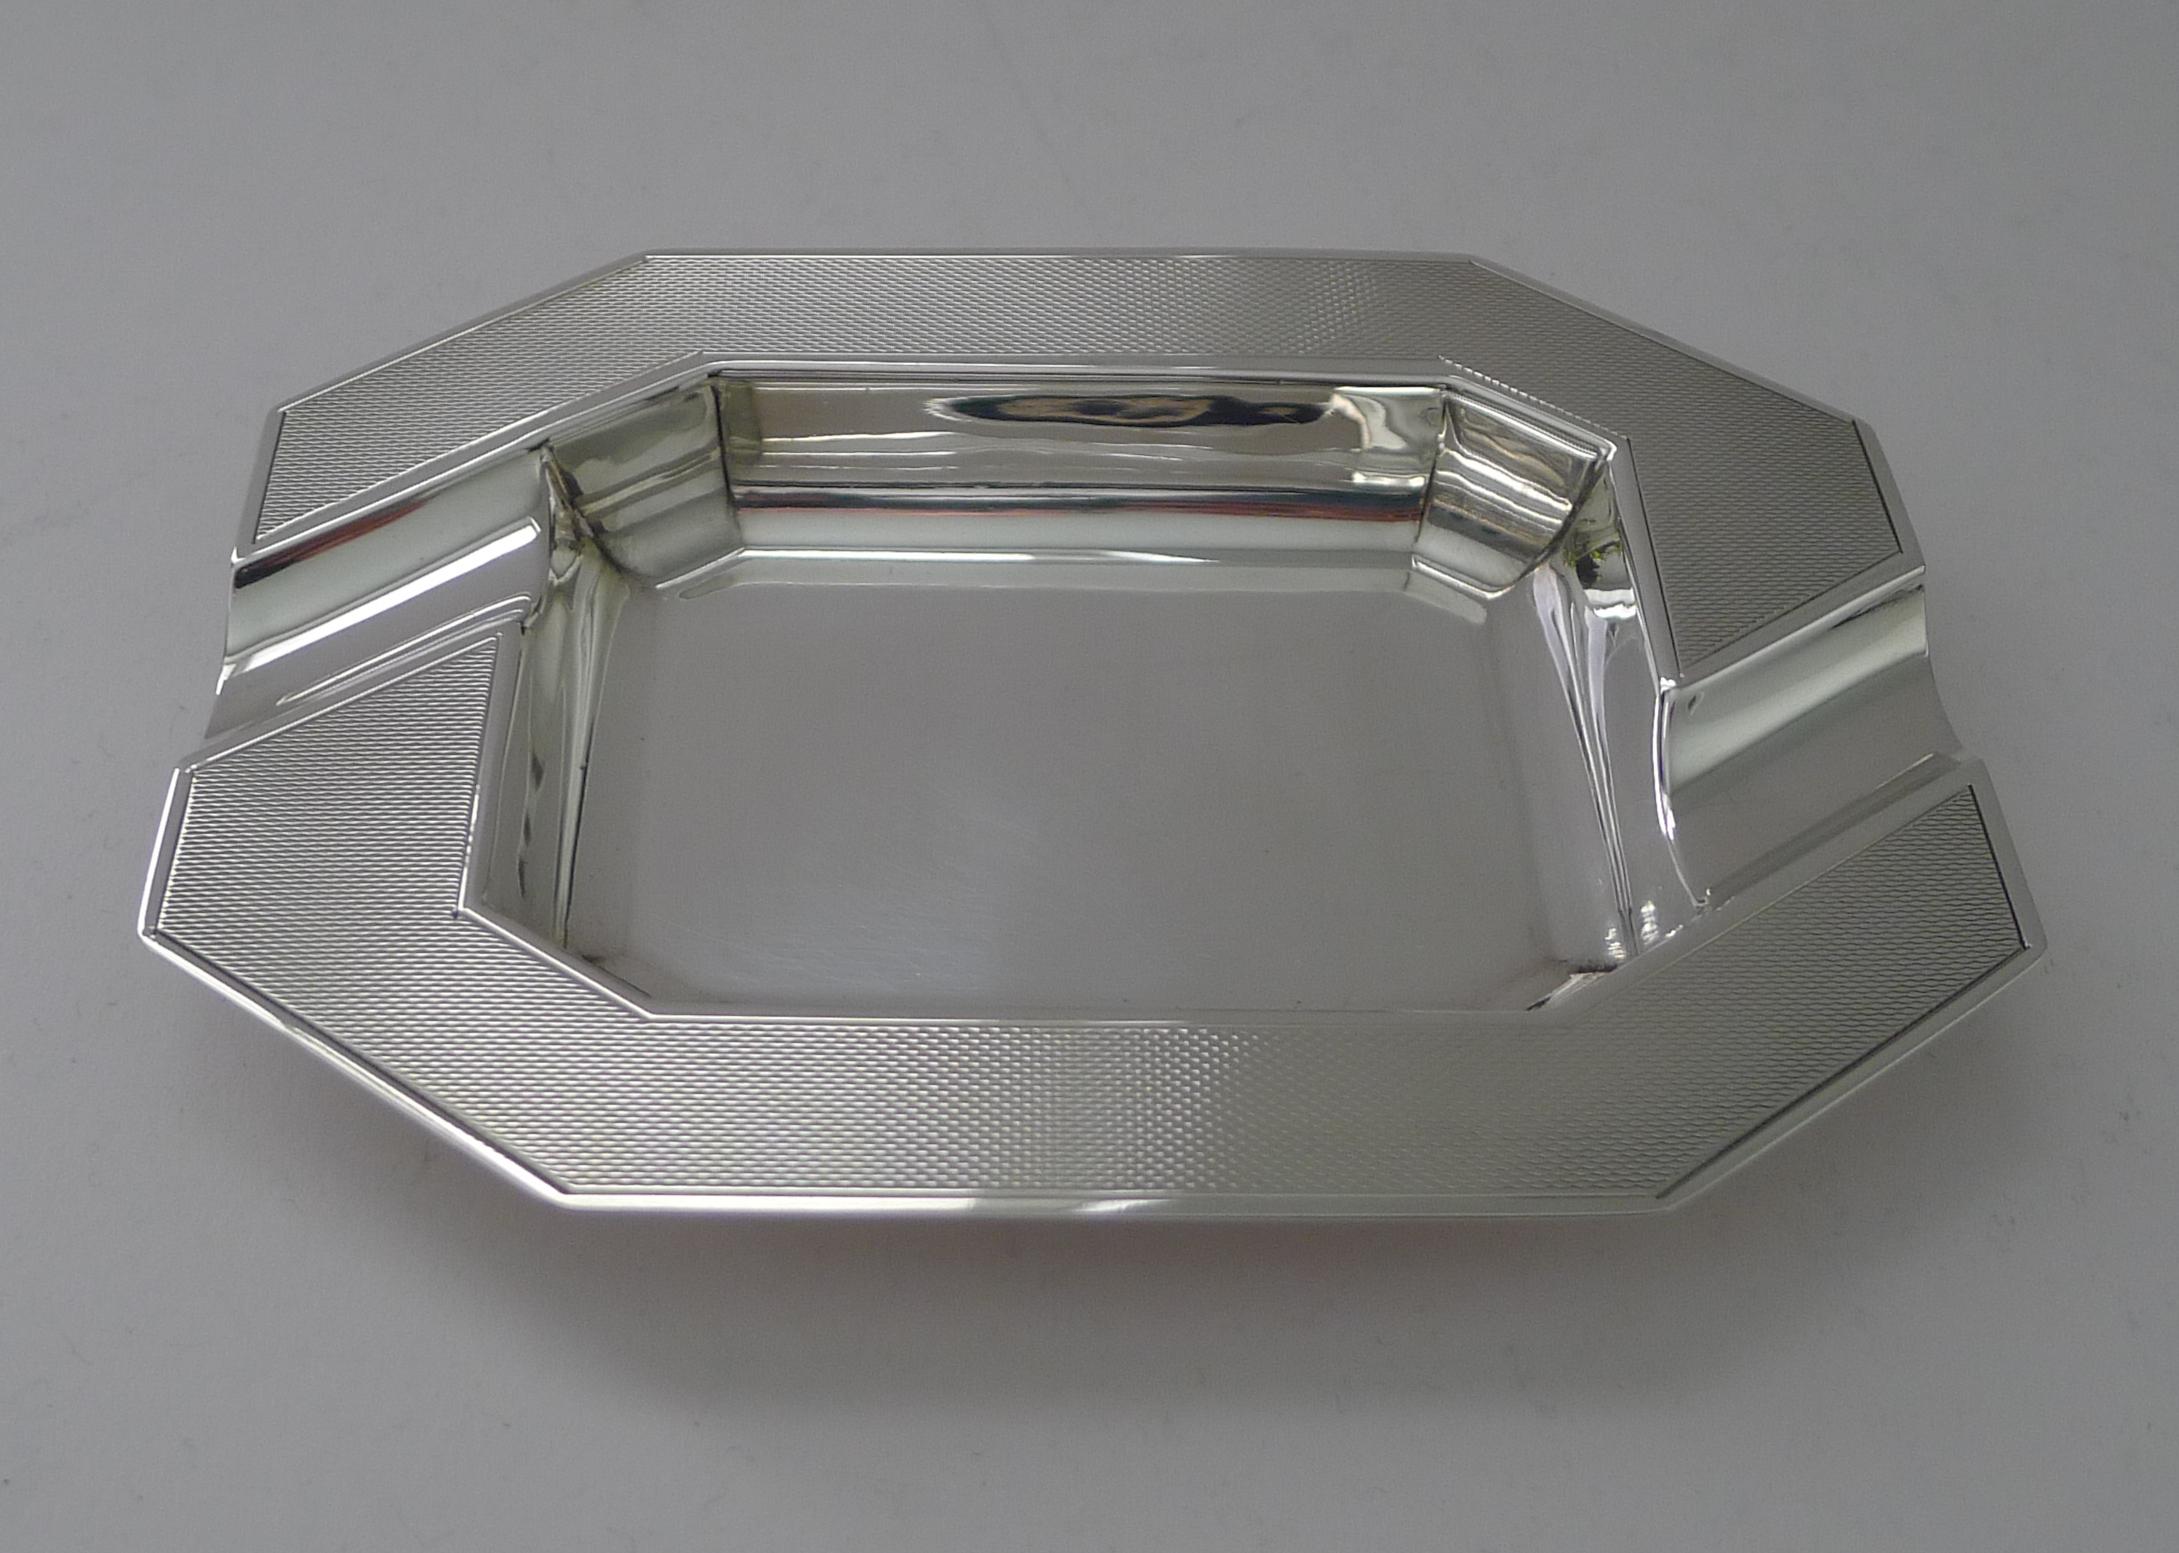 A handsome and stylish ashtray in solid English silver in a striking Art Deco design with engine turned decoration.

The silver is fully hallmarked for Birmingham 1950 together with the makers mark for the well renowned silversmith, William